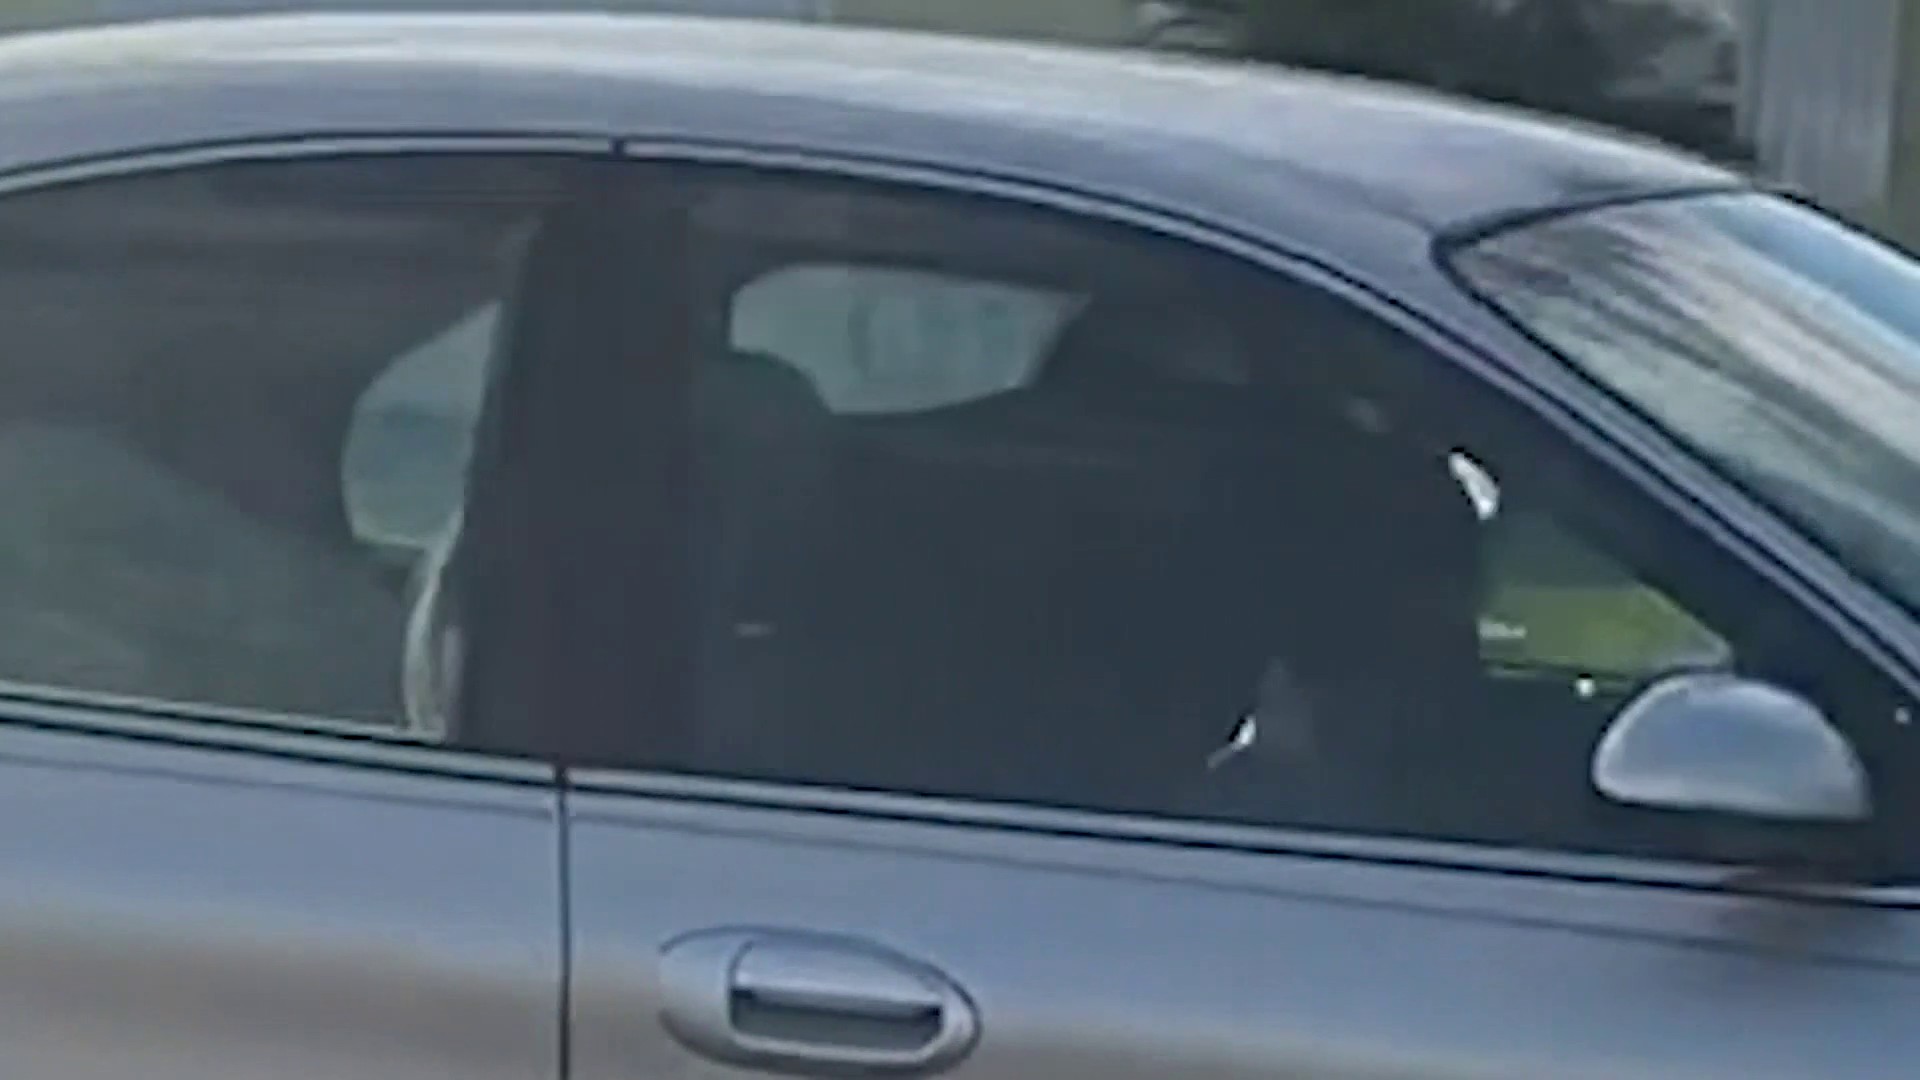 VIDEO: Dog days in Florida as pooch seen ‘driving’ car